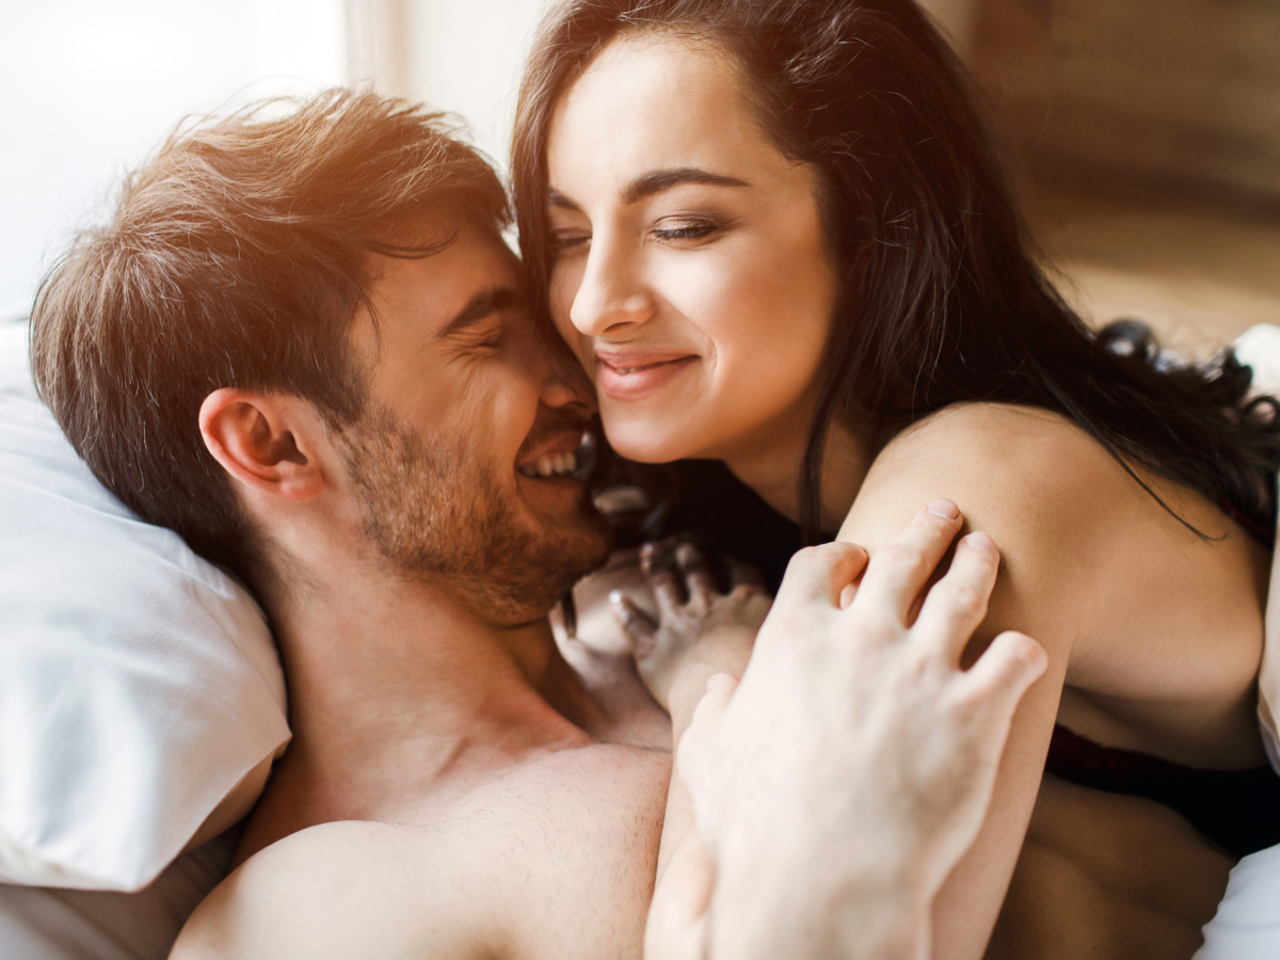 Study Couples have more sex when women initiate image